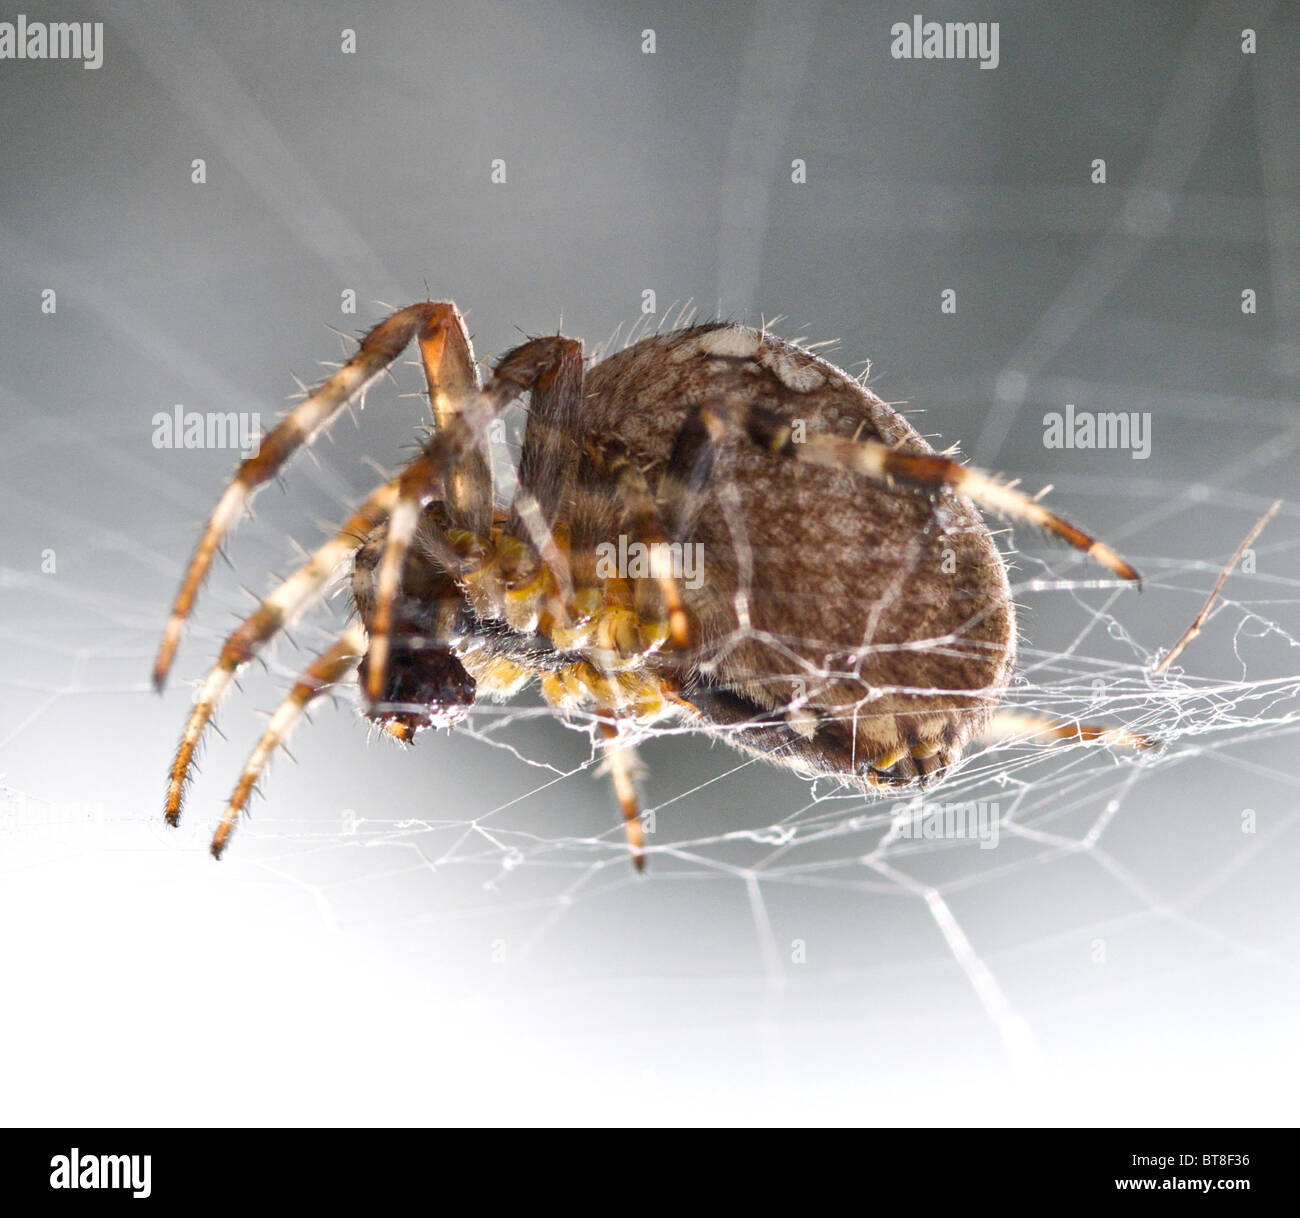 Female Common Garden Spider Devouring Remains Of A Fly Uk Stock